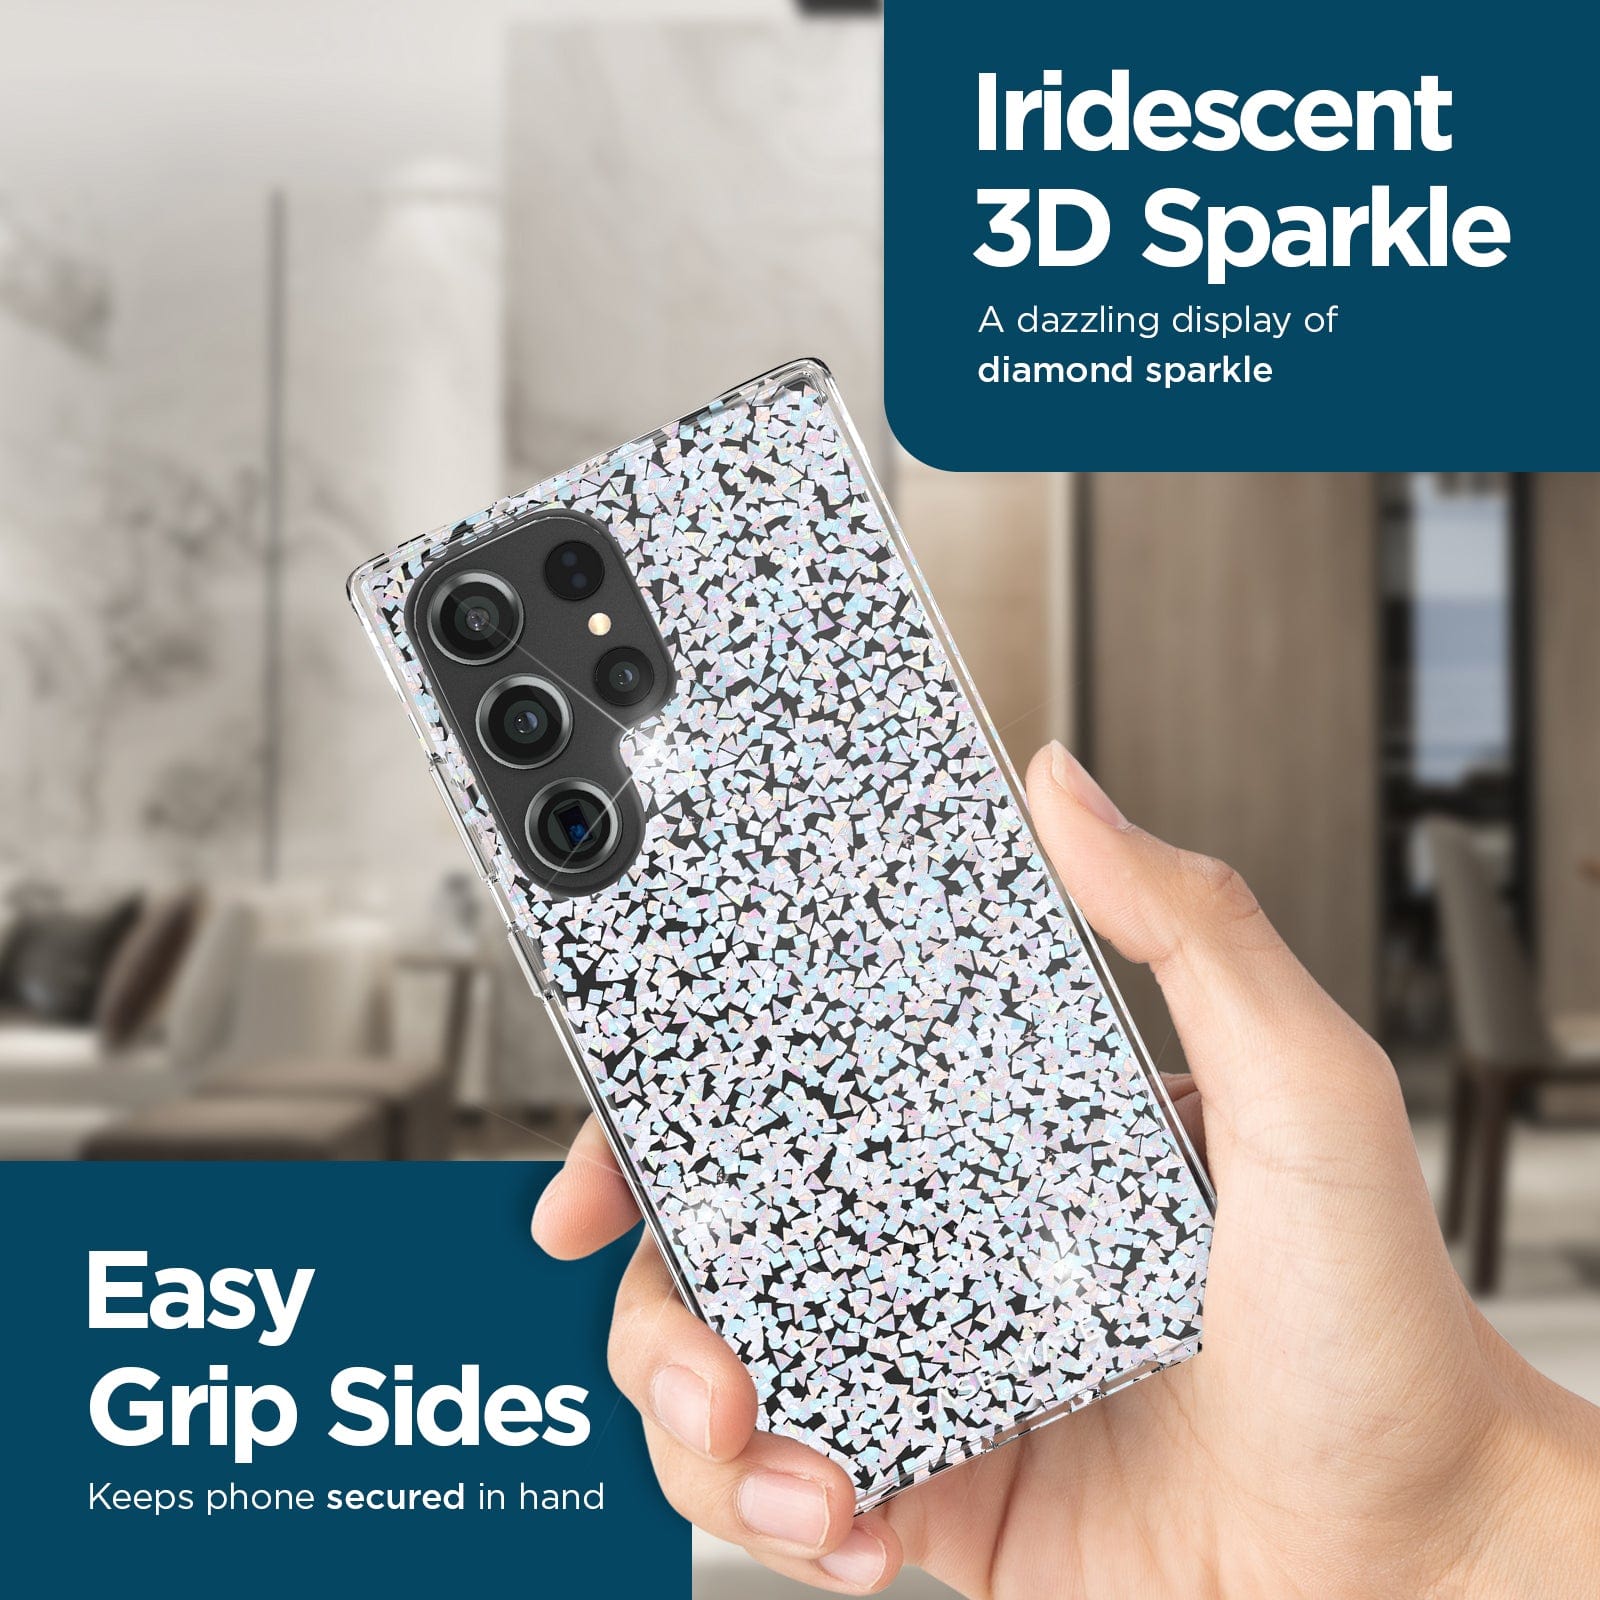 IRIDESCENT 3D SPARKLE. A DAZZLING DISPLAY OF DIAMOND SPARKLE. EASY GRIP SIDES KEEPS PHONE SECURED IN HAND.